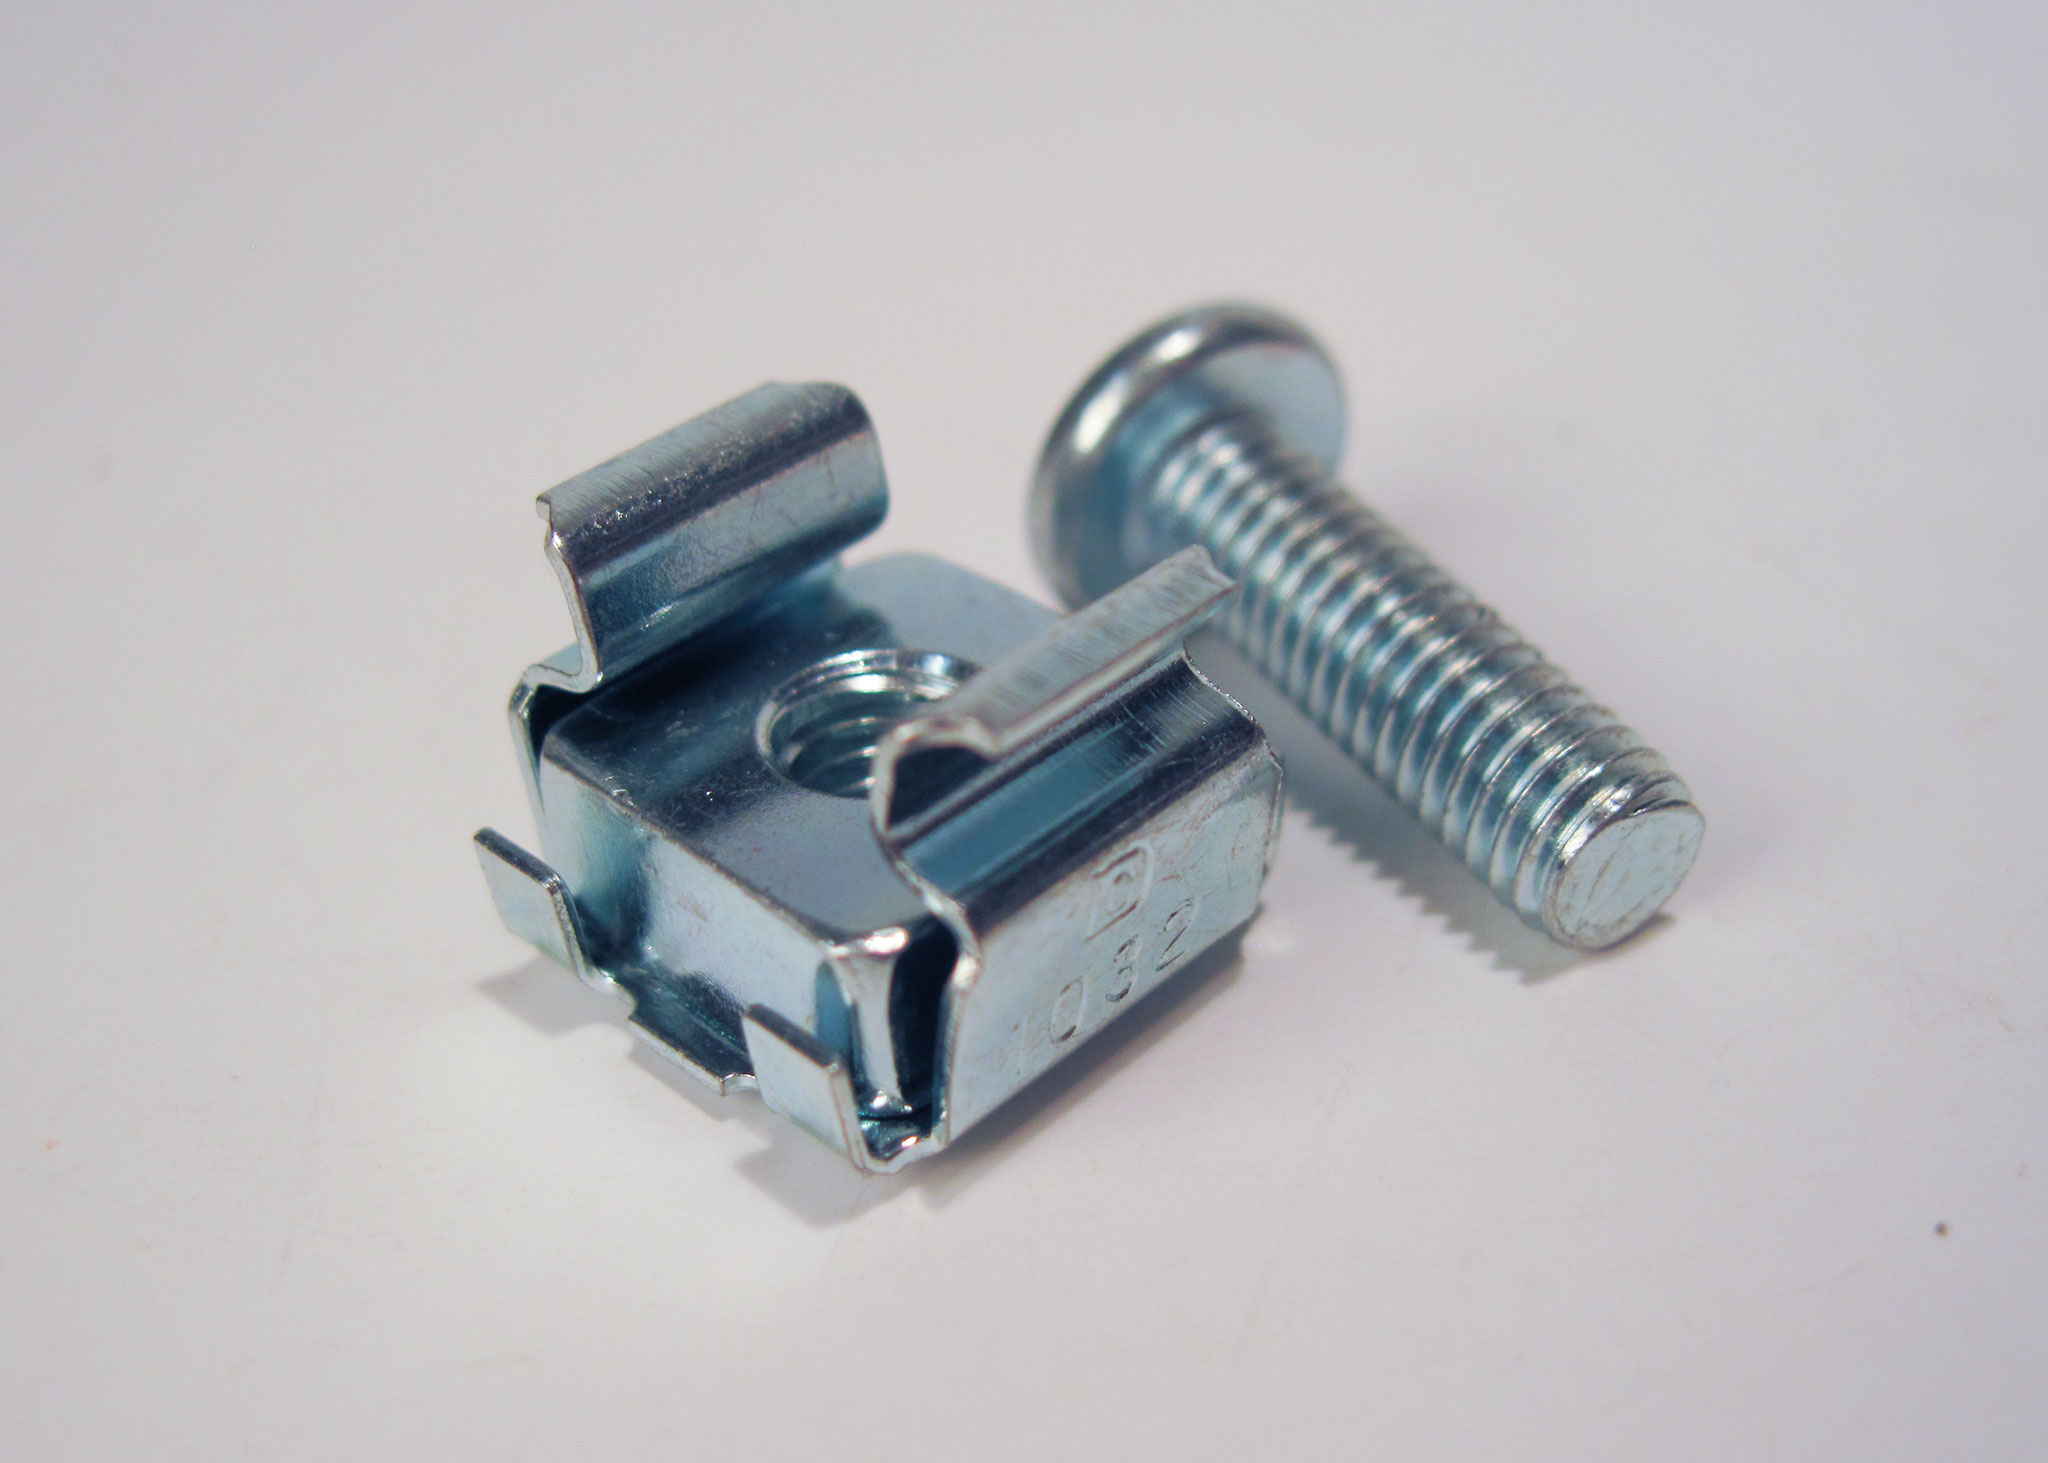 10-32 cage nut and screw kit